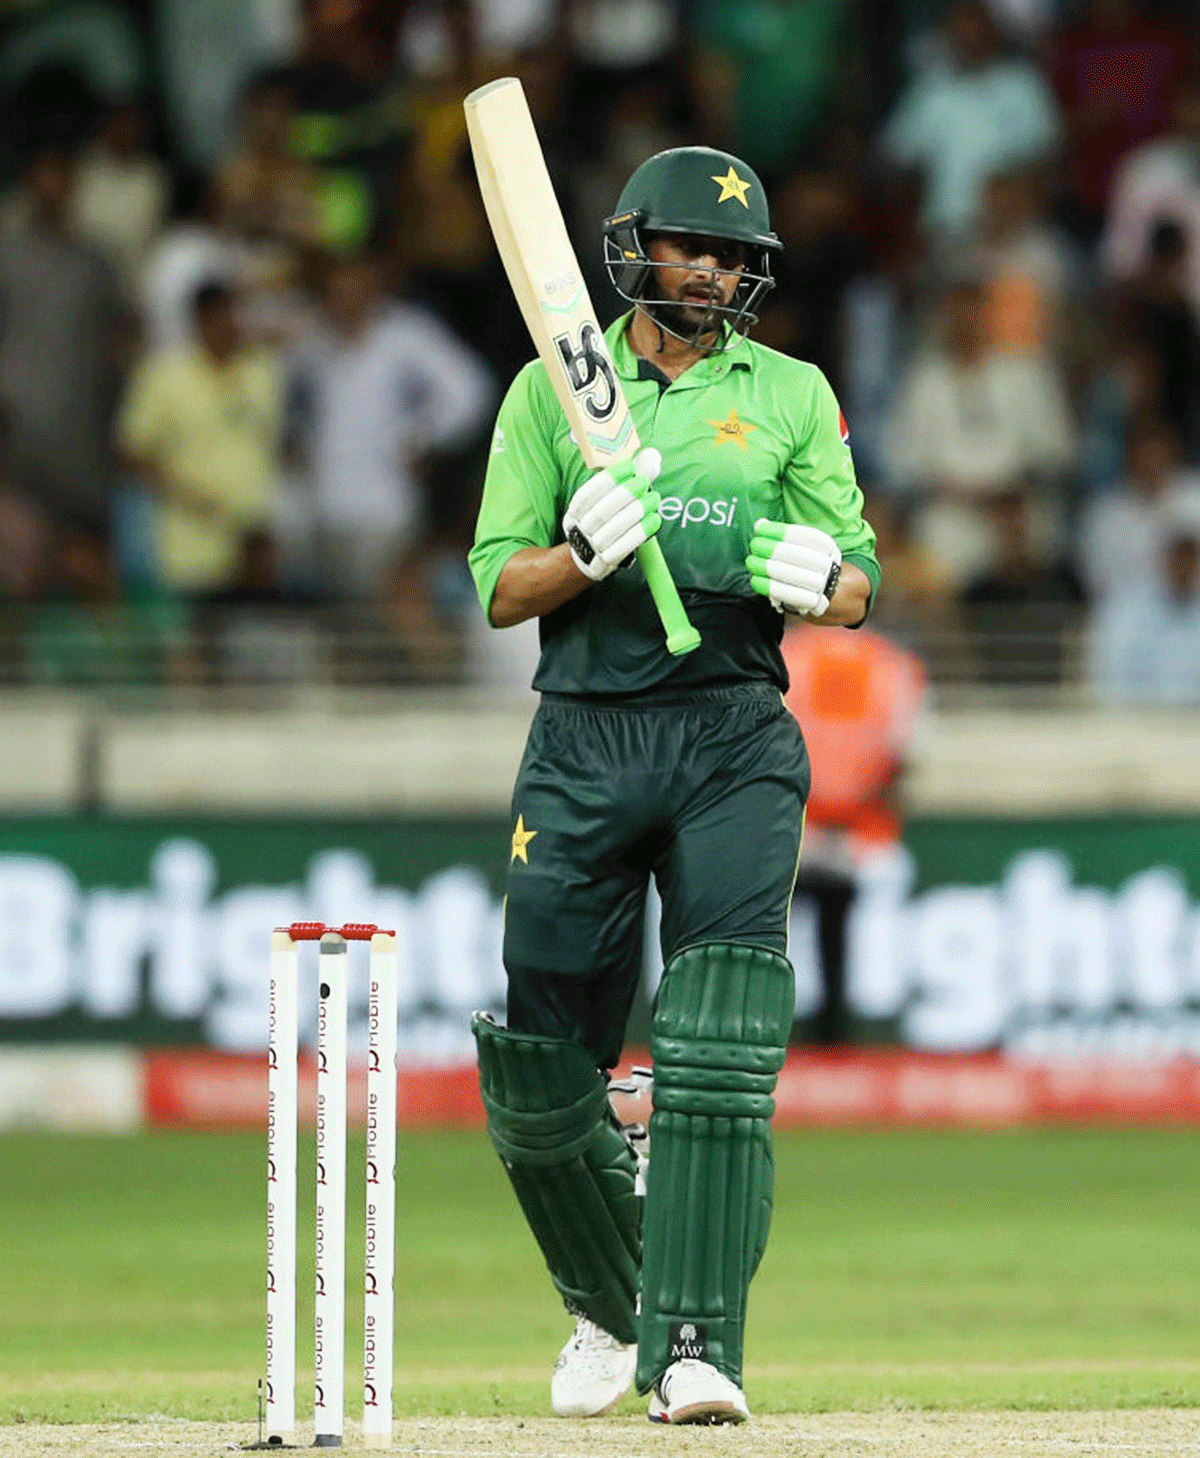 Shoaib Malik, 39, captained Pakistan in the inaugural event in 2007 and was a member of the side that won the title in 2009.